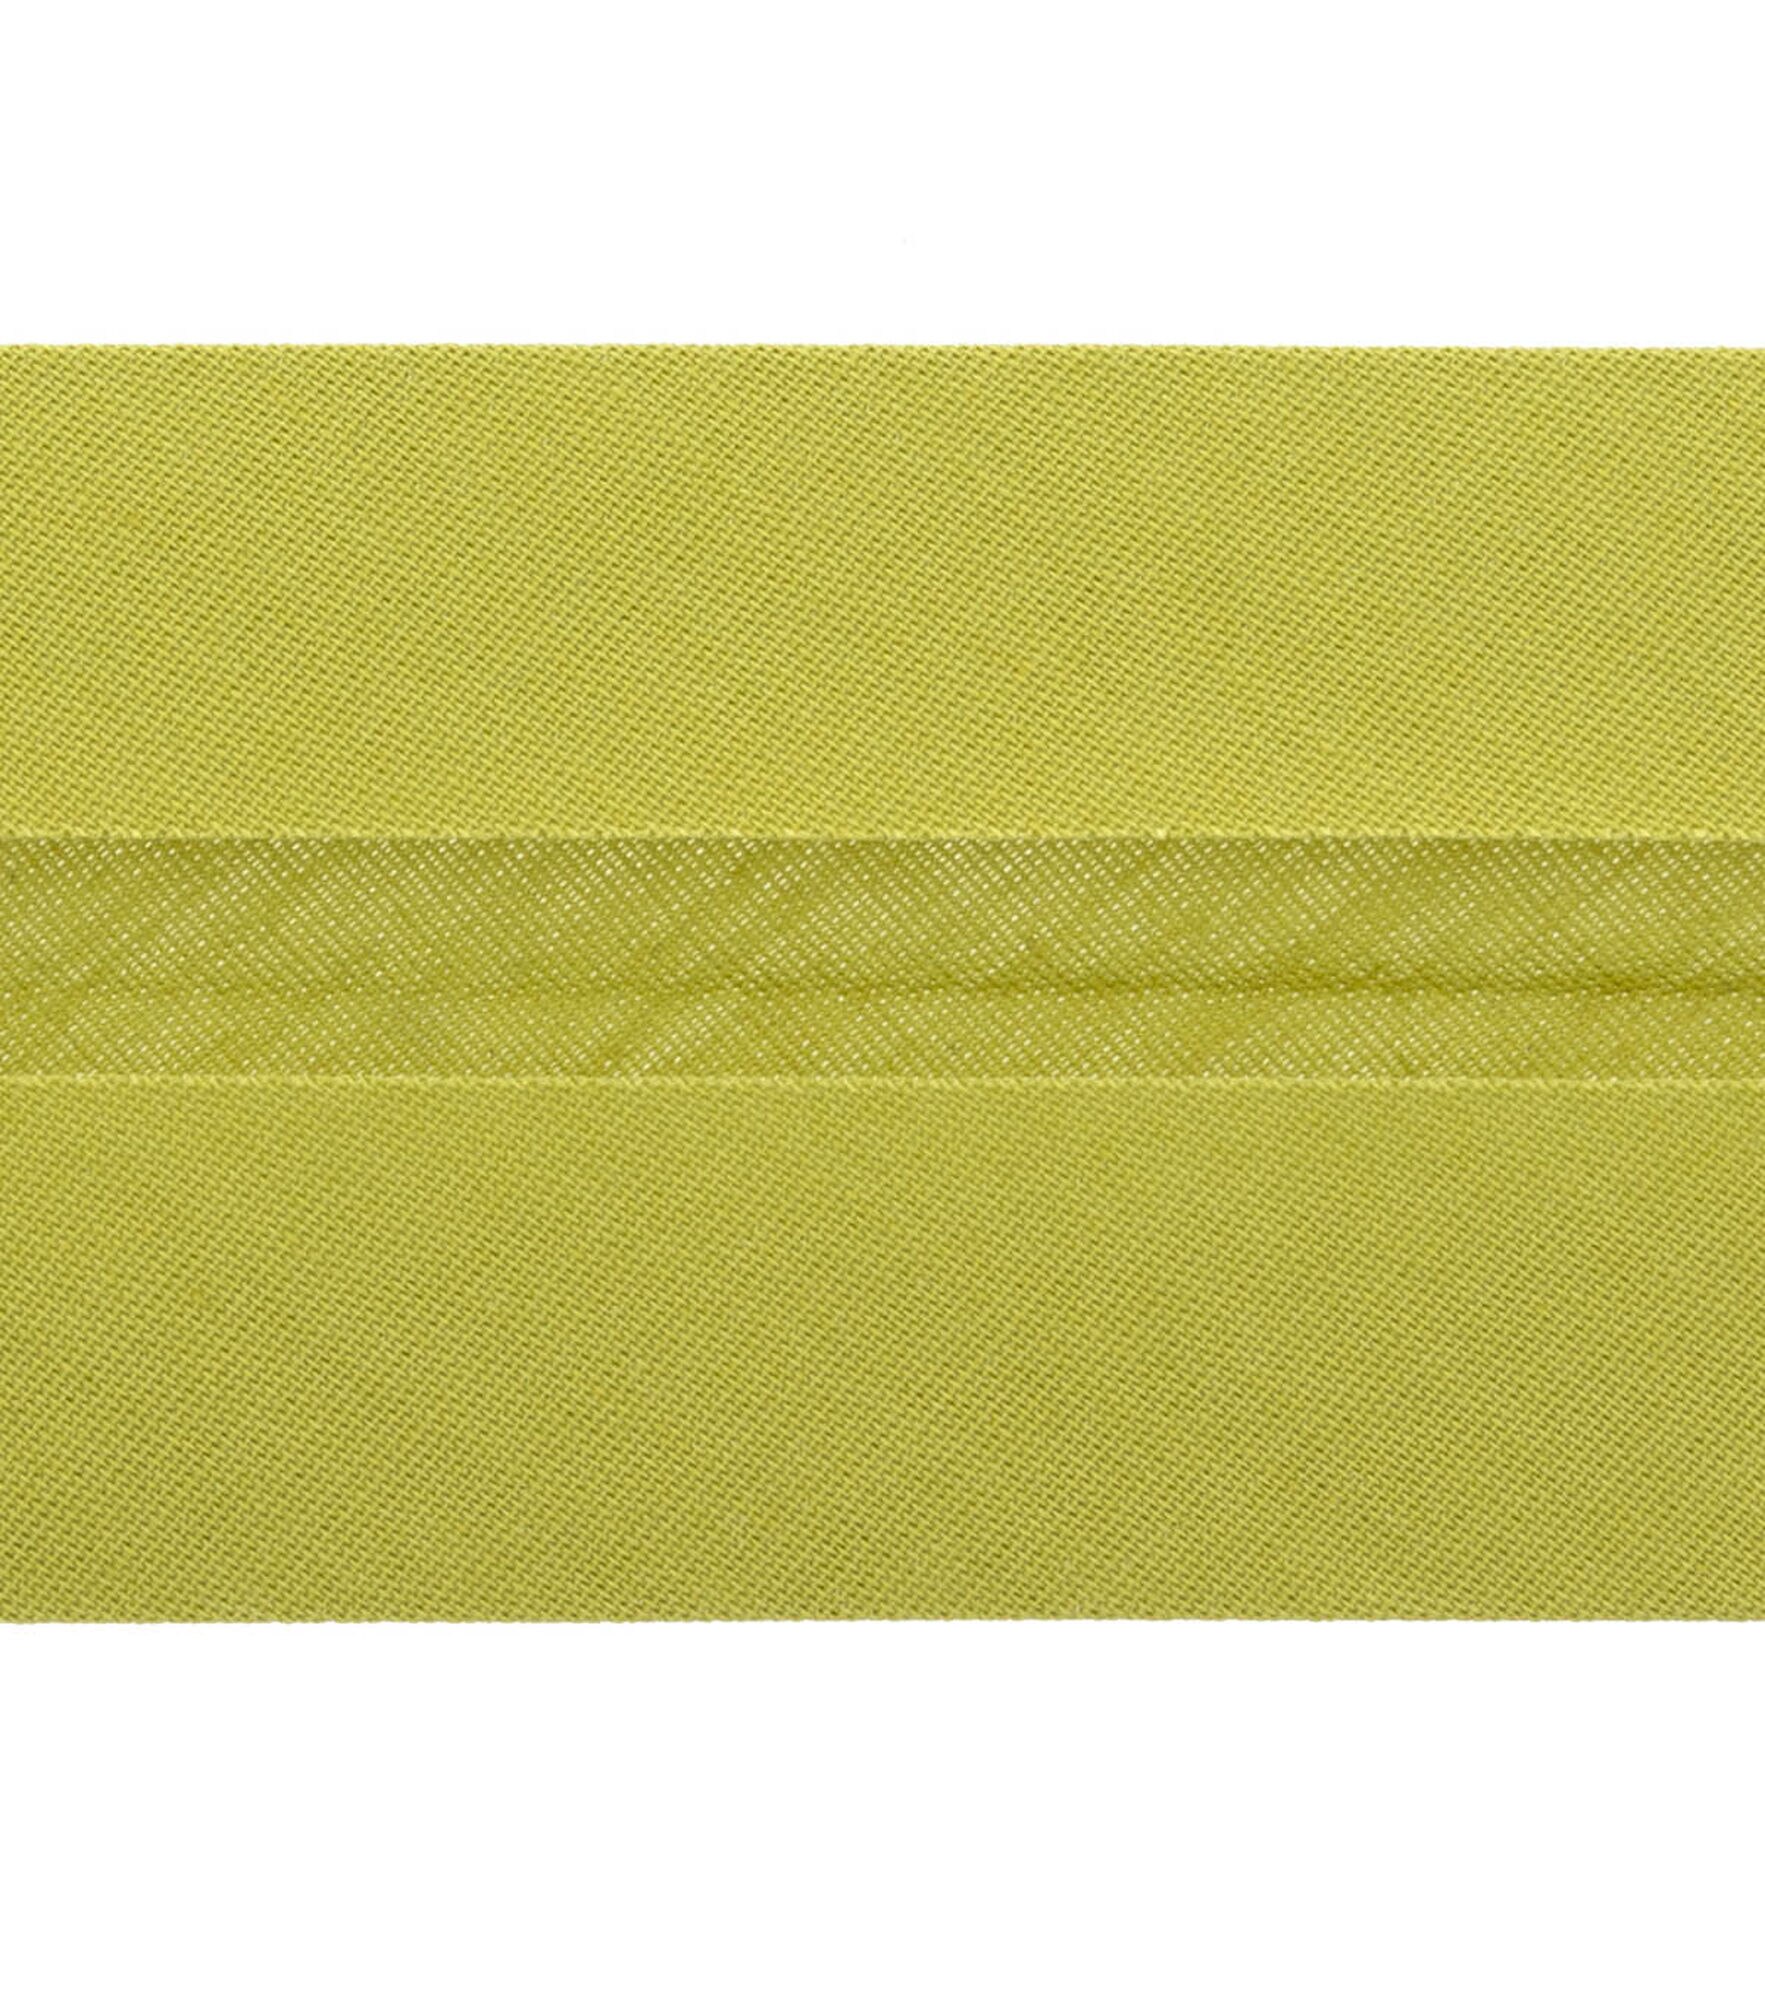 Wrights 7/8" x 3yd Double Fold Quilt Binding, Dill Pickle, hi-res